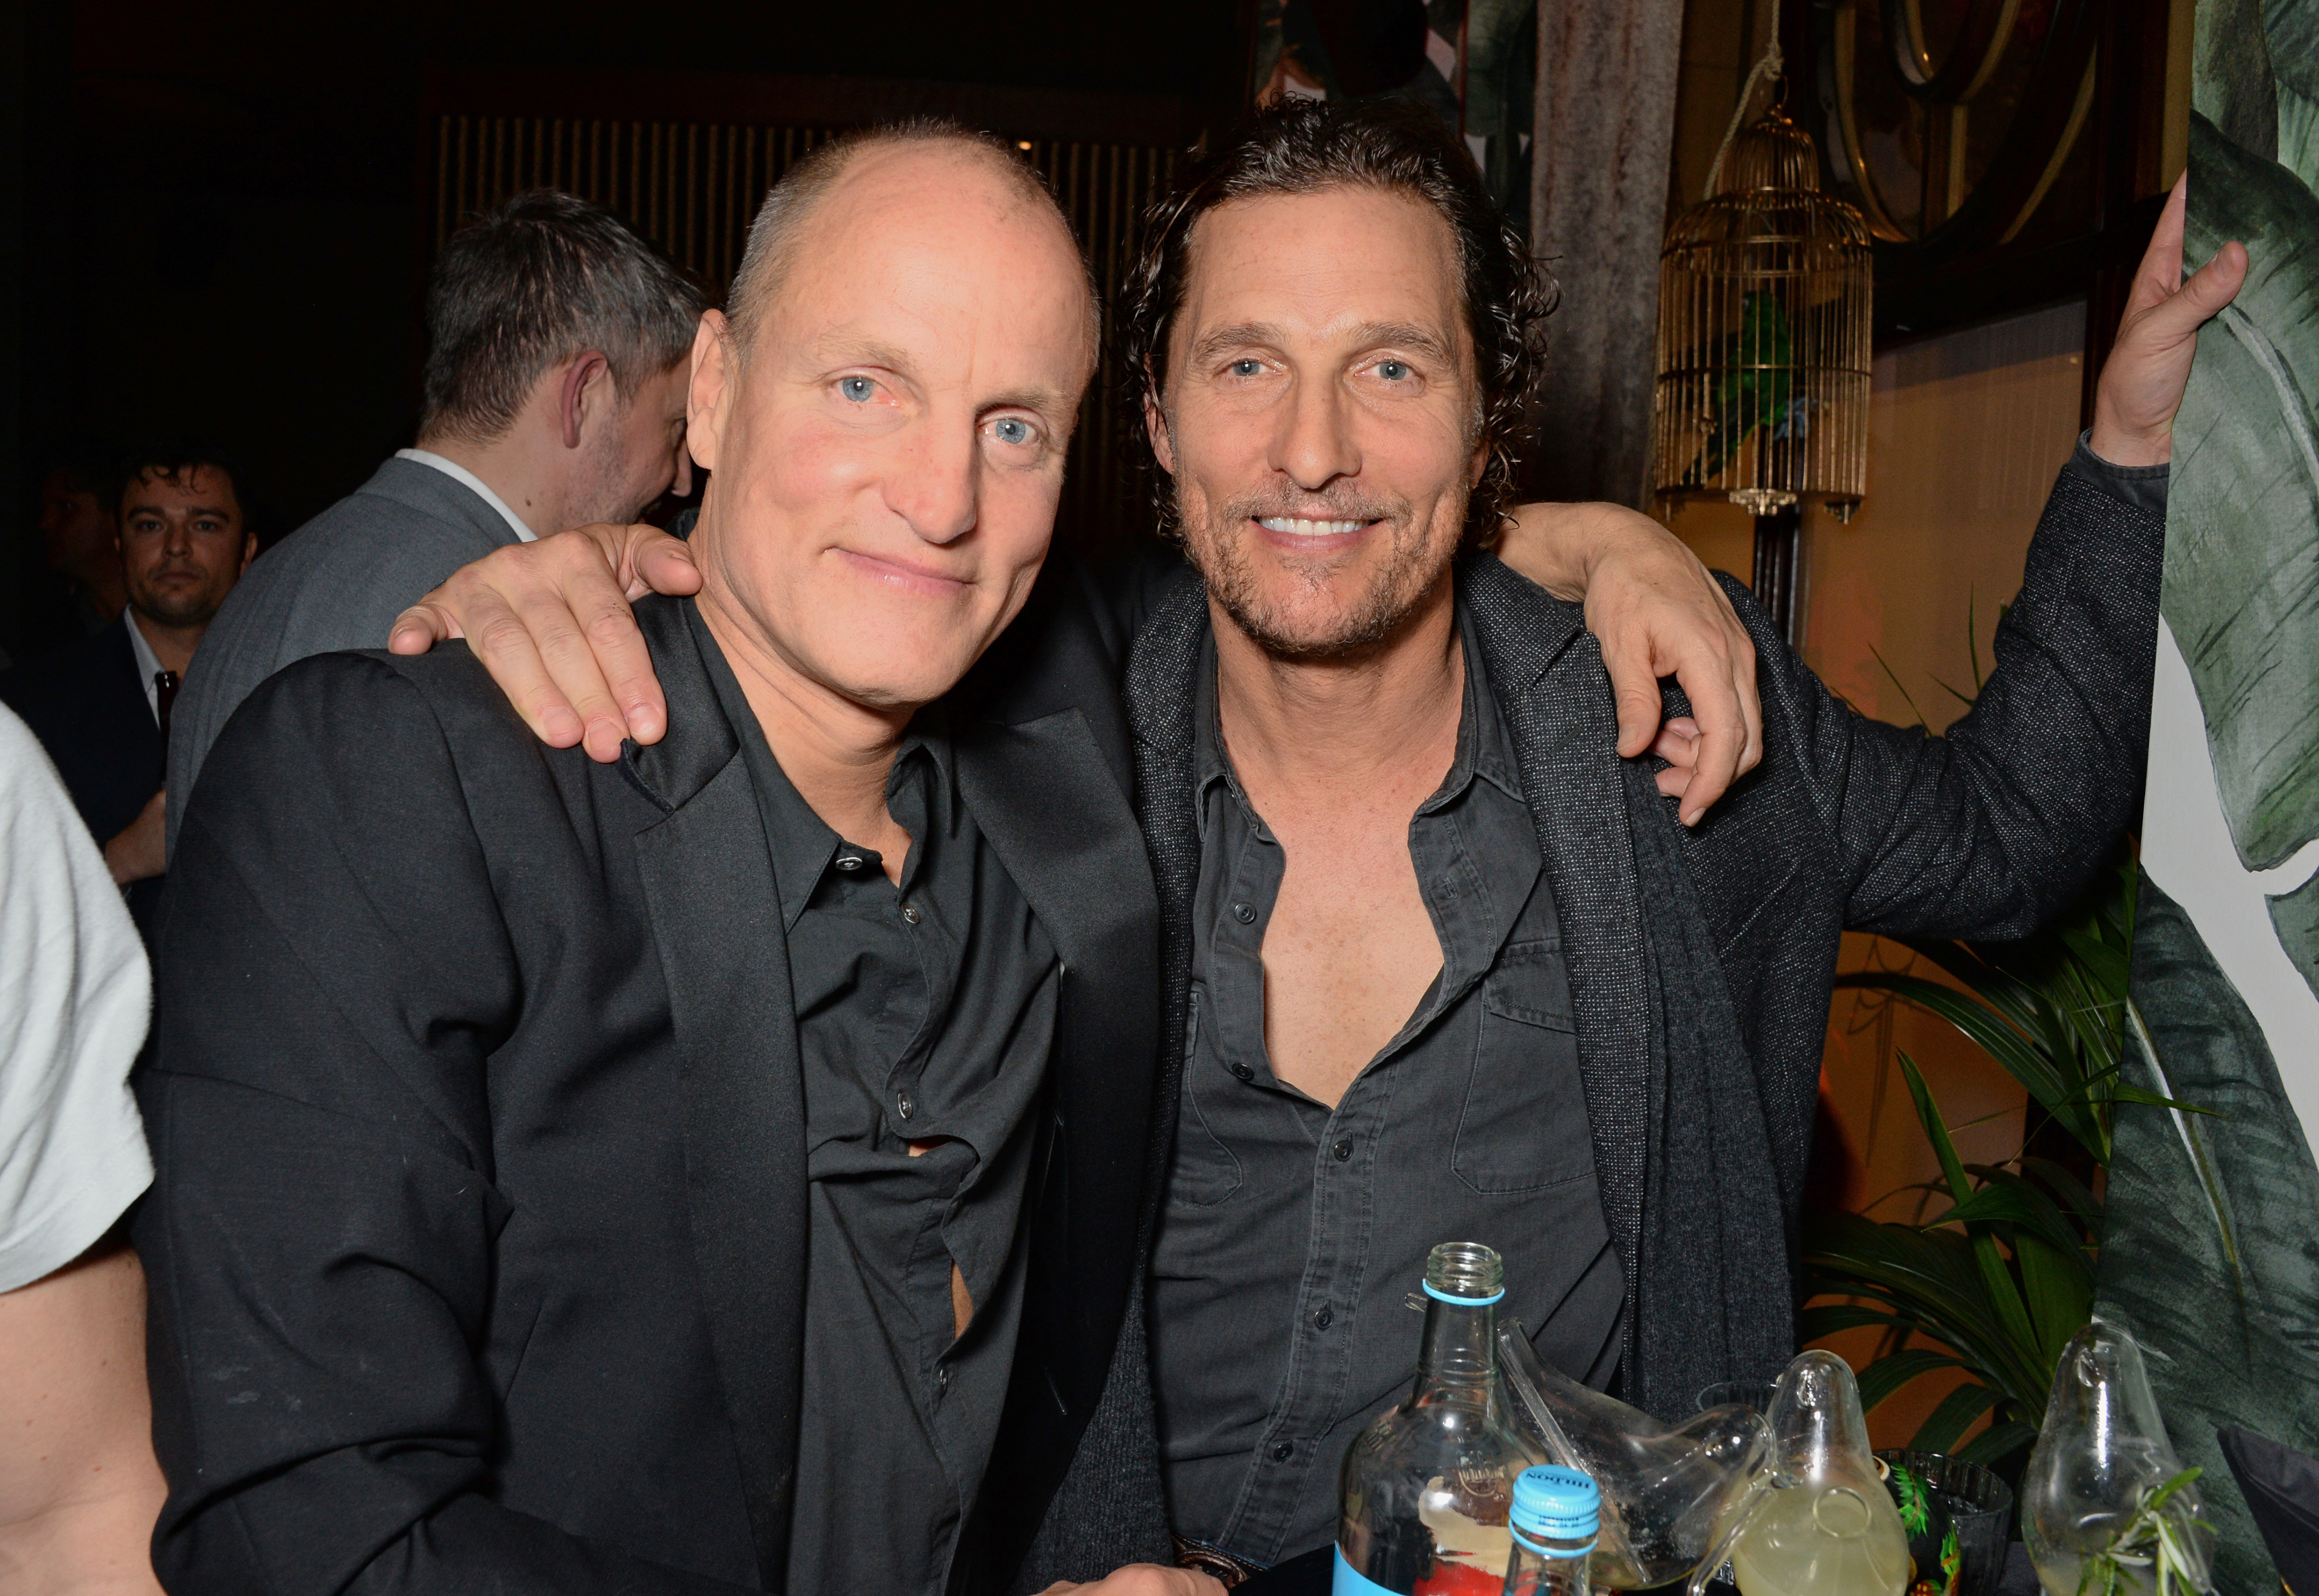 Woody Harrelson and Matthew McConaughey joining the festivities at the grand opening of The Parrot, a new bar at The Waldorf Hilton in London, England, hosted by Idris Elba on November 8, 2018 | Source: Getty Images